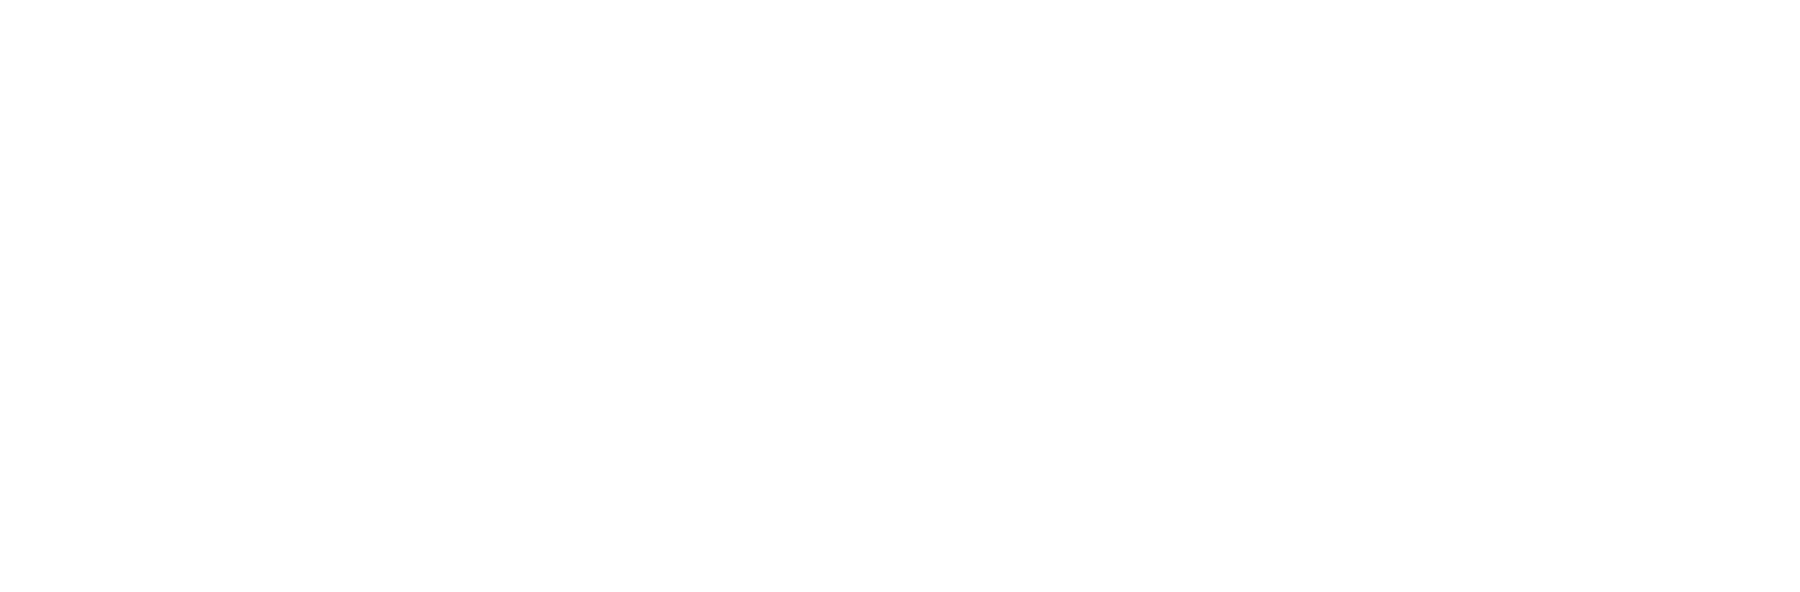 Buy Shadow Of The Colossus (PS4) - PSN Account - GLOBAL - Cheap